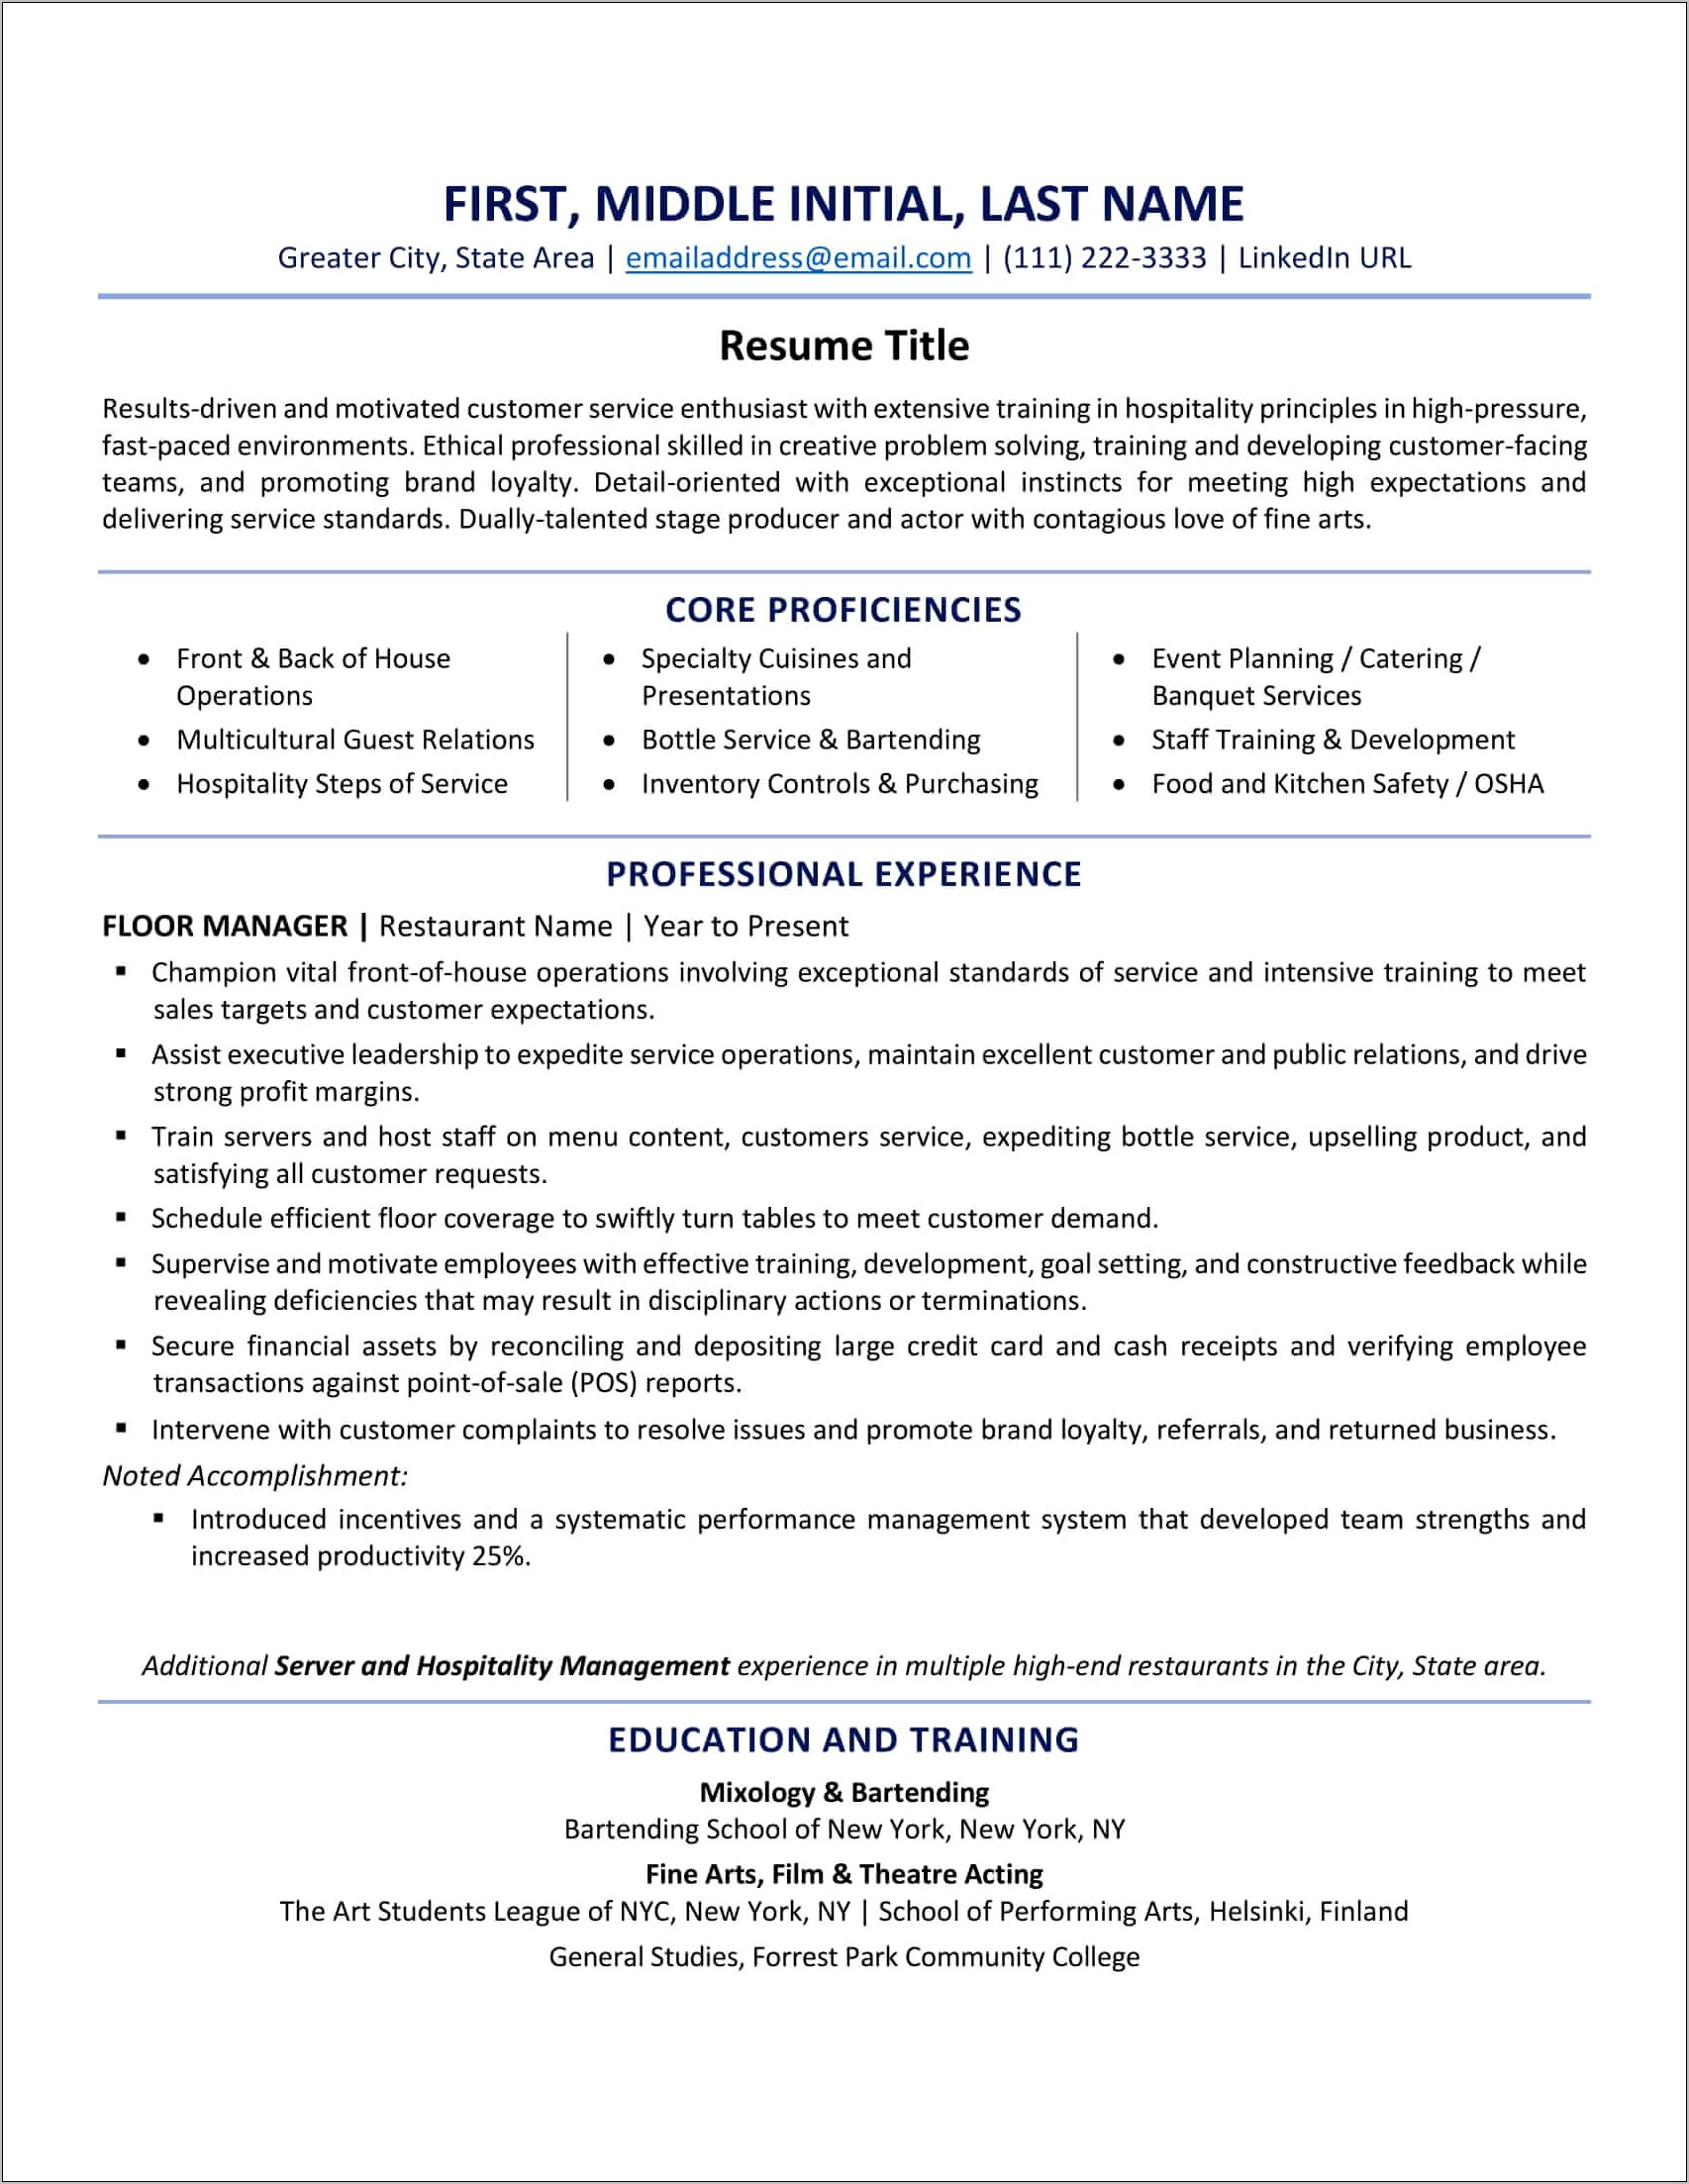 Examples Of A Good Resume Title For Experienced